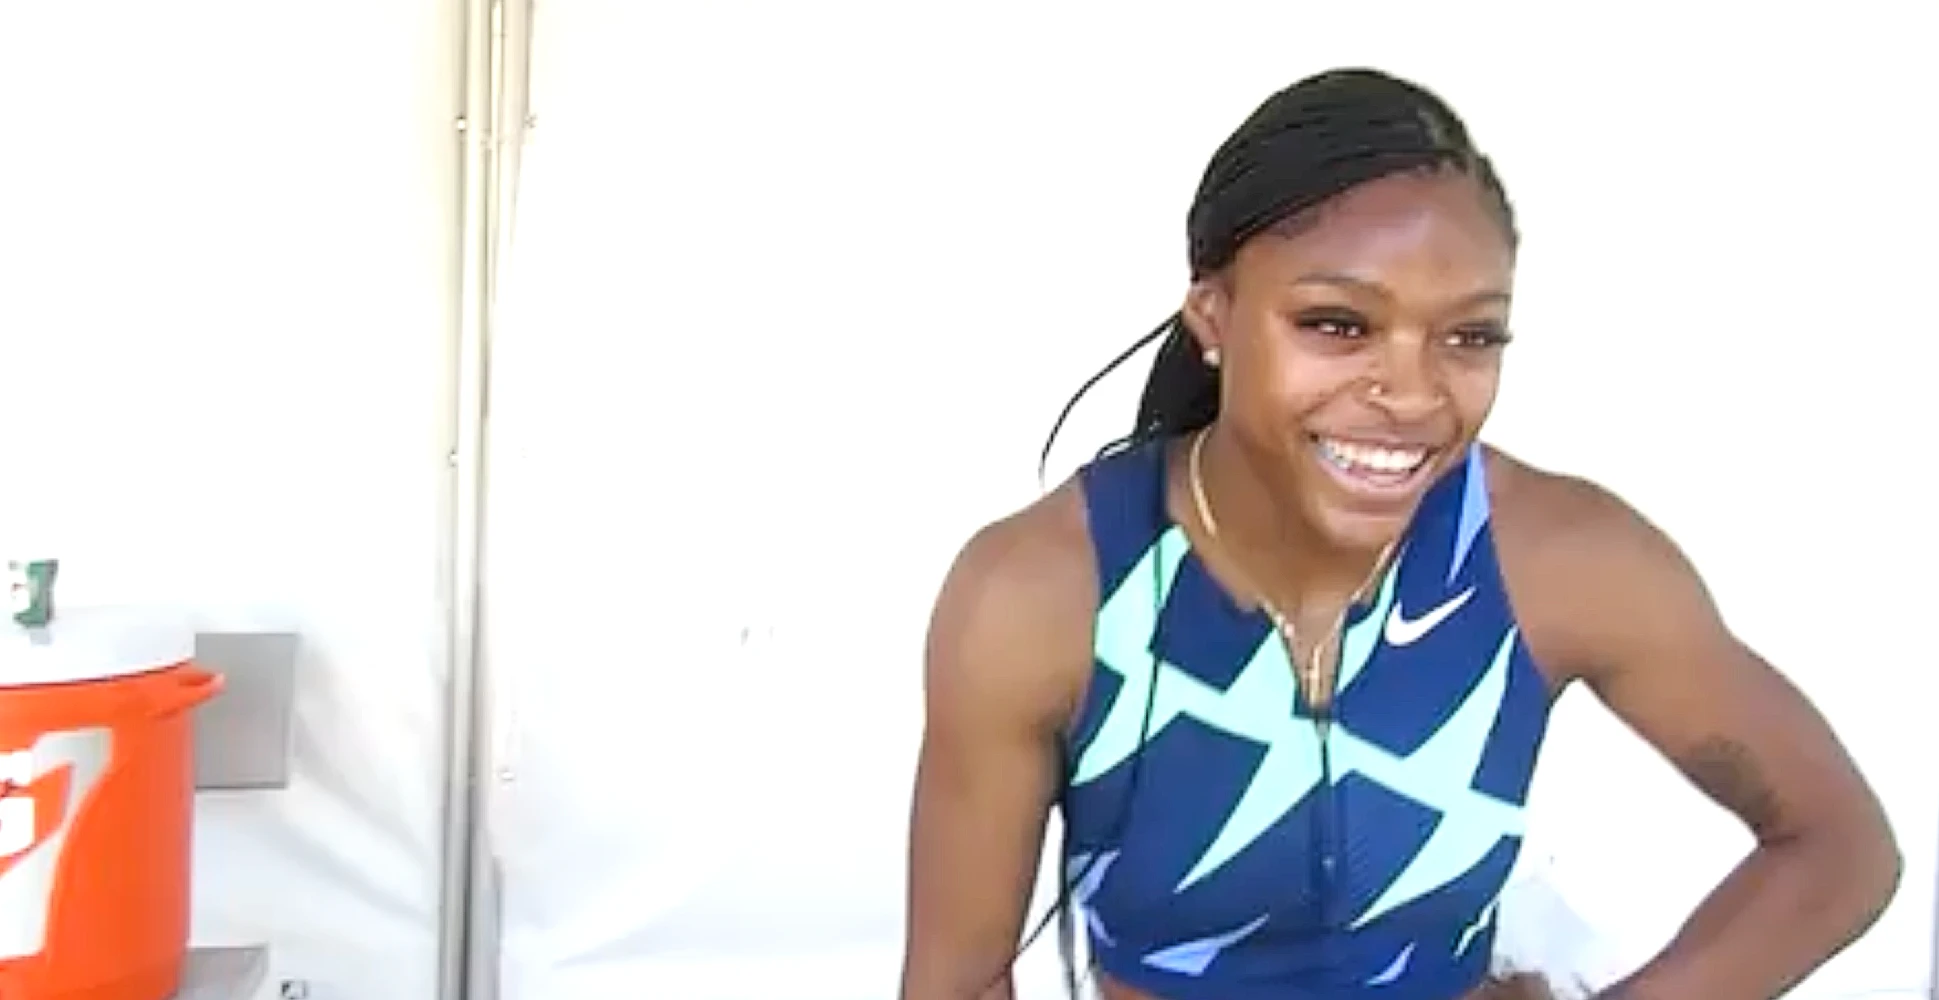 Tonea Marshall of USA during an interview after 100m hurdles